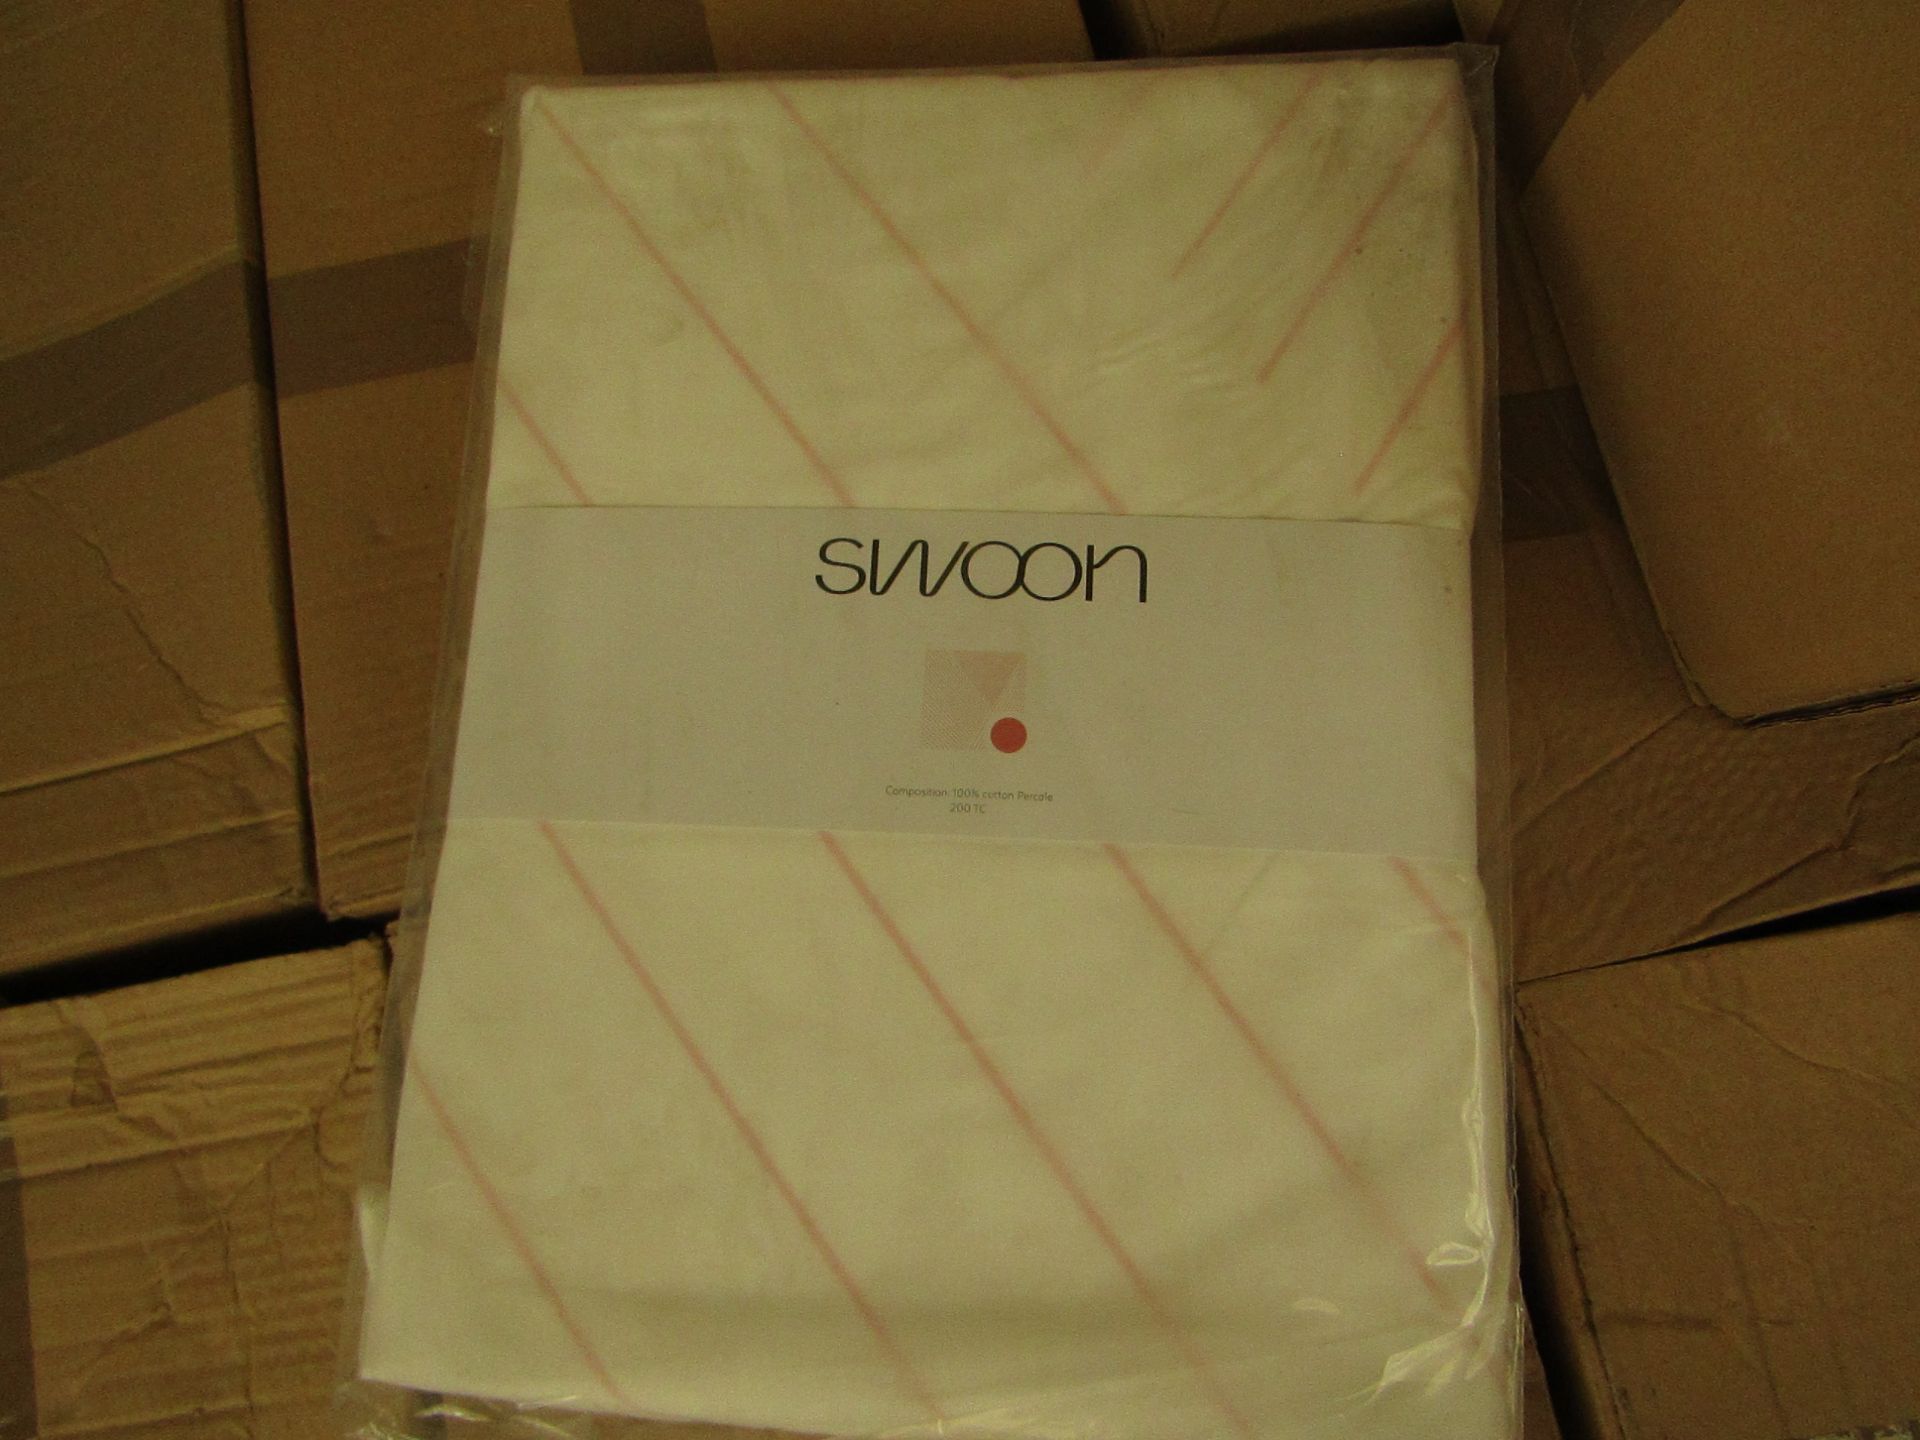 | 8X | SWOON BOOLE PINK DOUBLE DUVET SET THAT INCLUDE DUVET COVER AND 2 MATCHING PILLOW CASES |